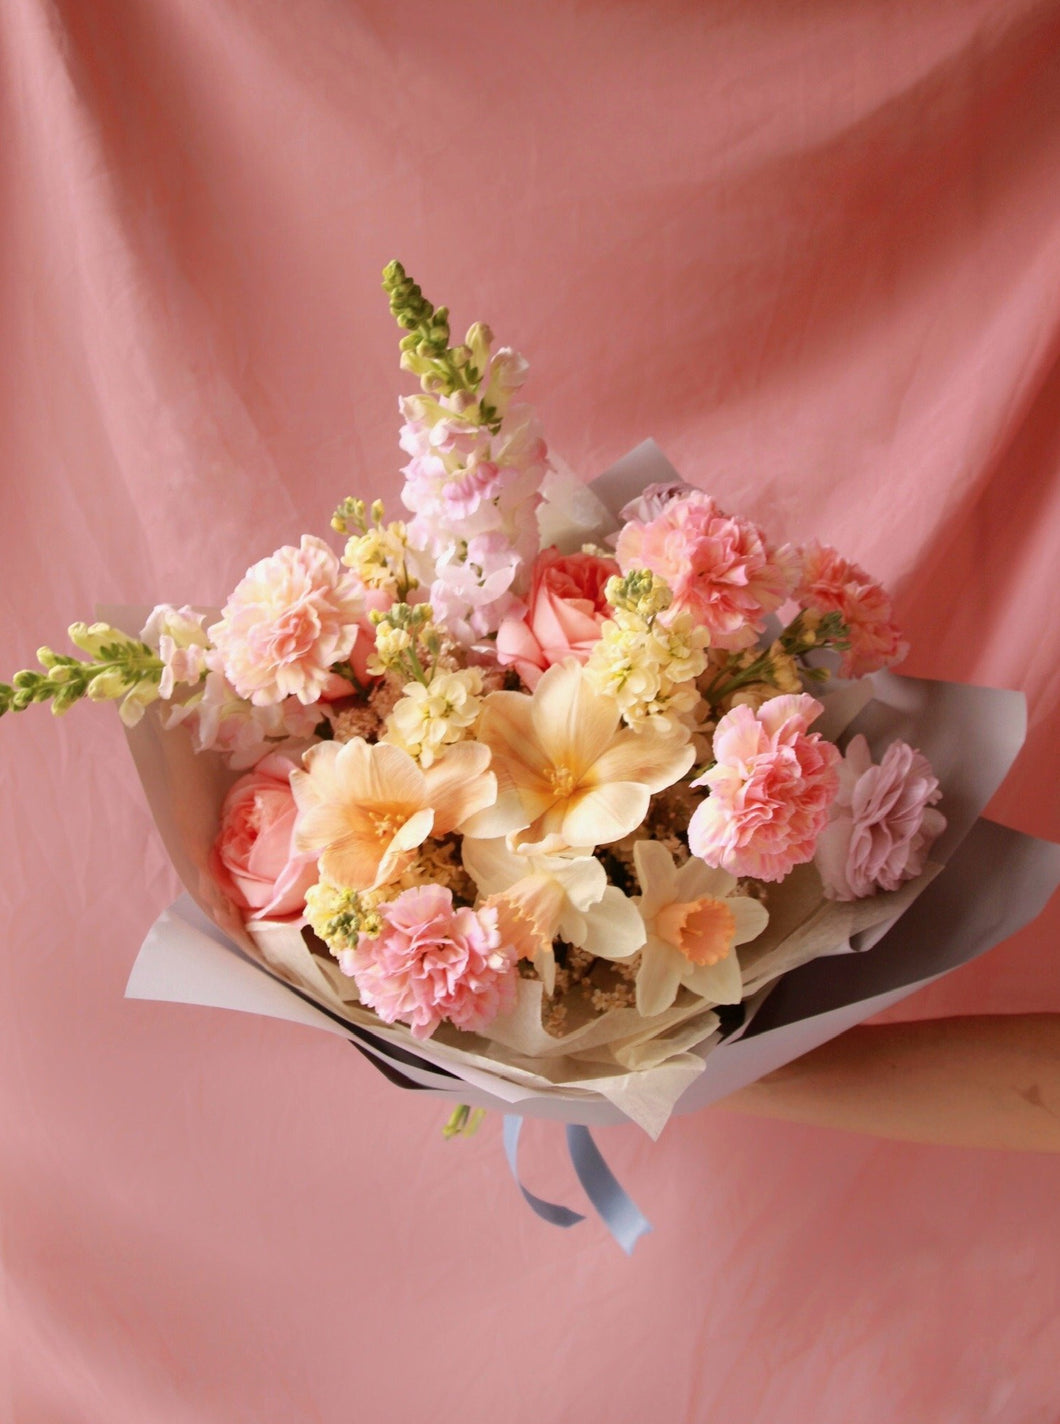 Rococo's ‘Pick of the Day’ Bouquet